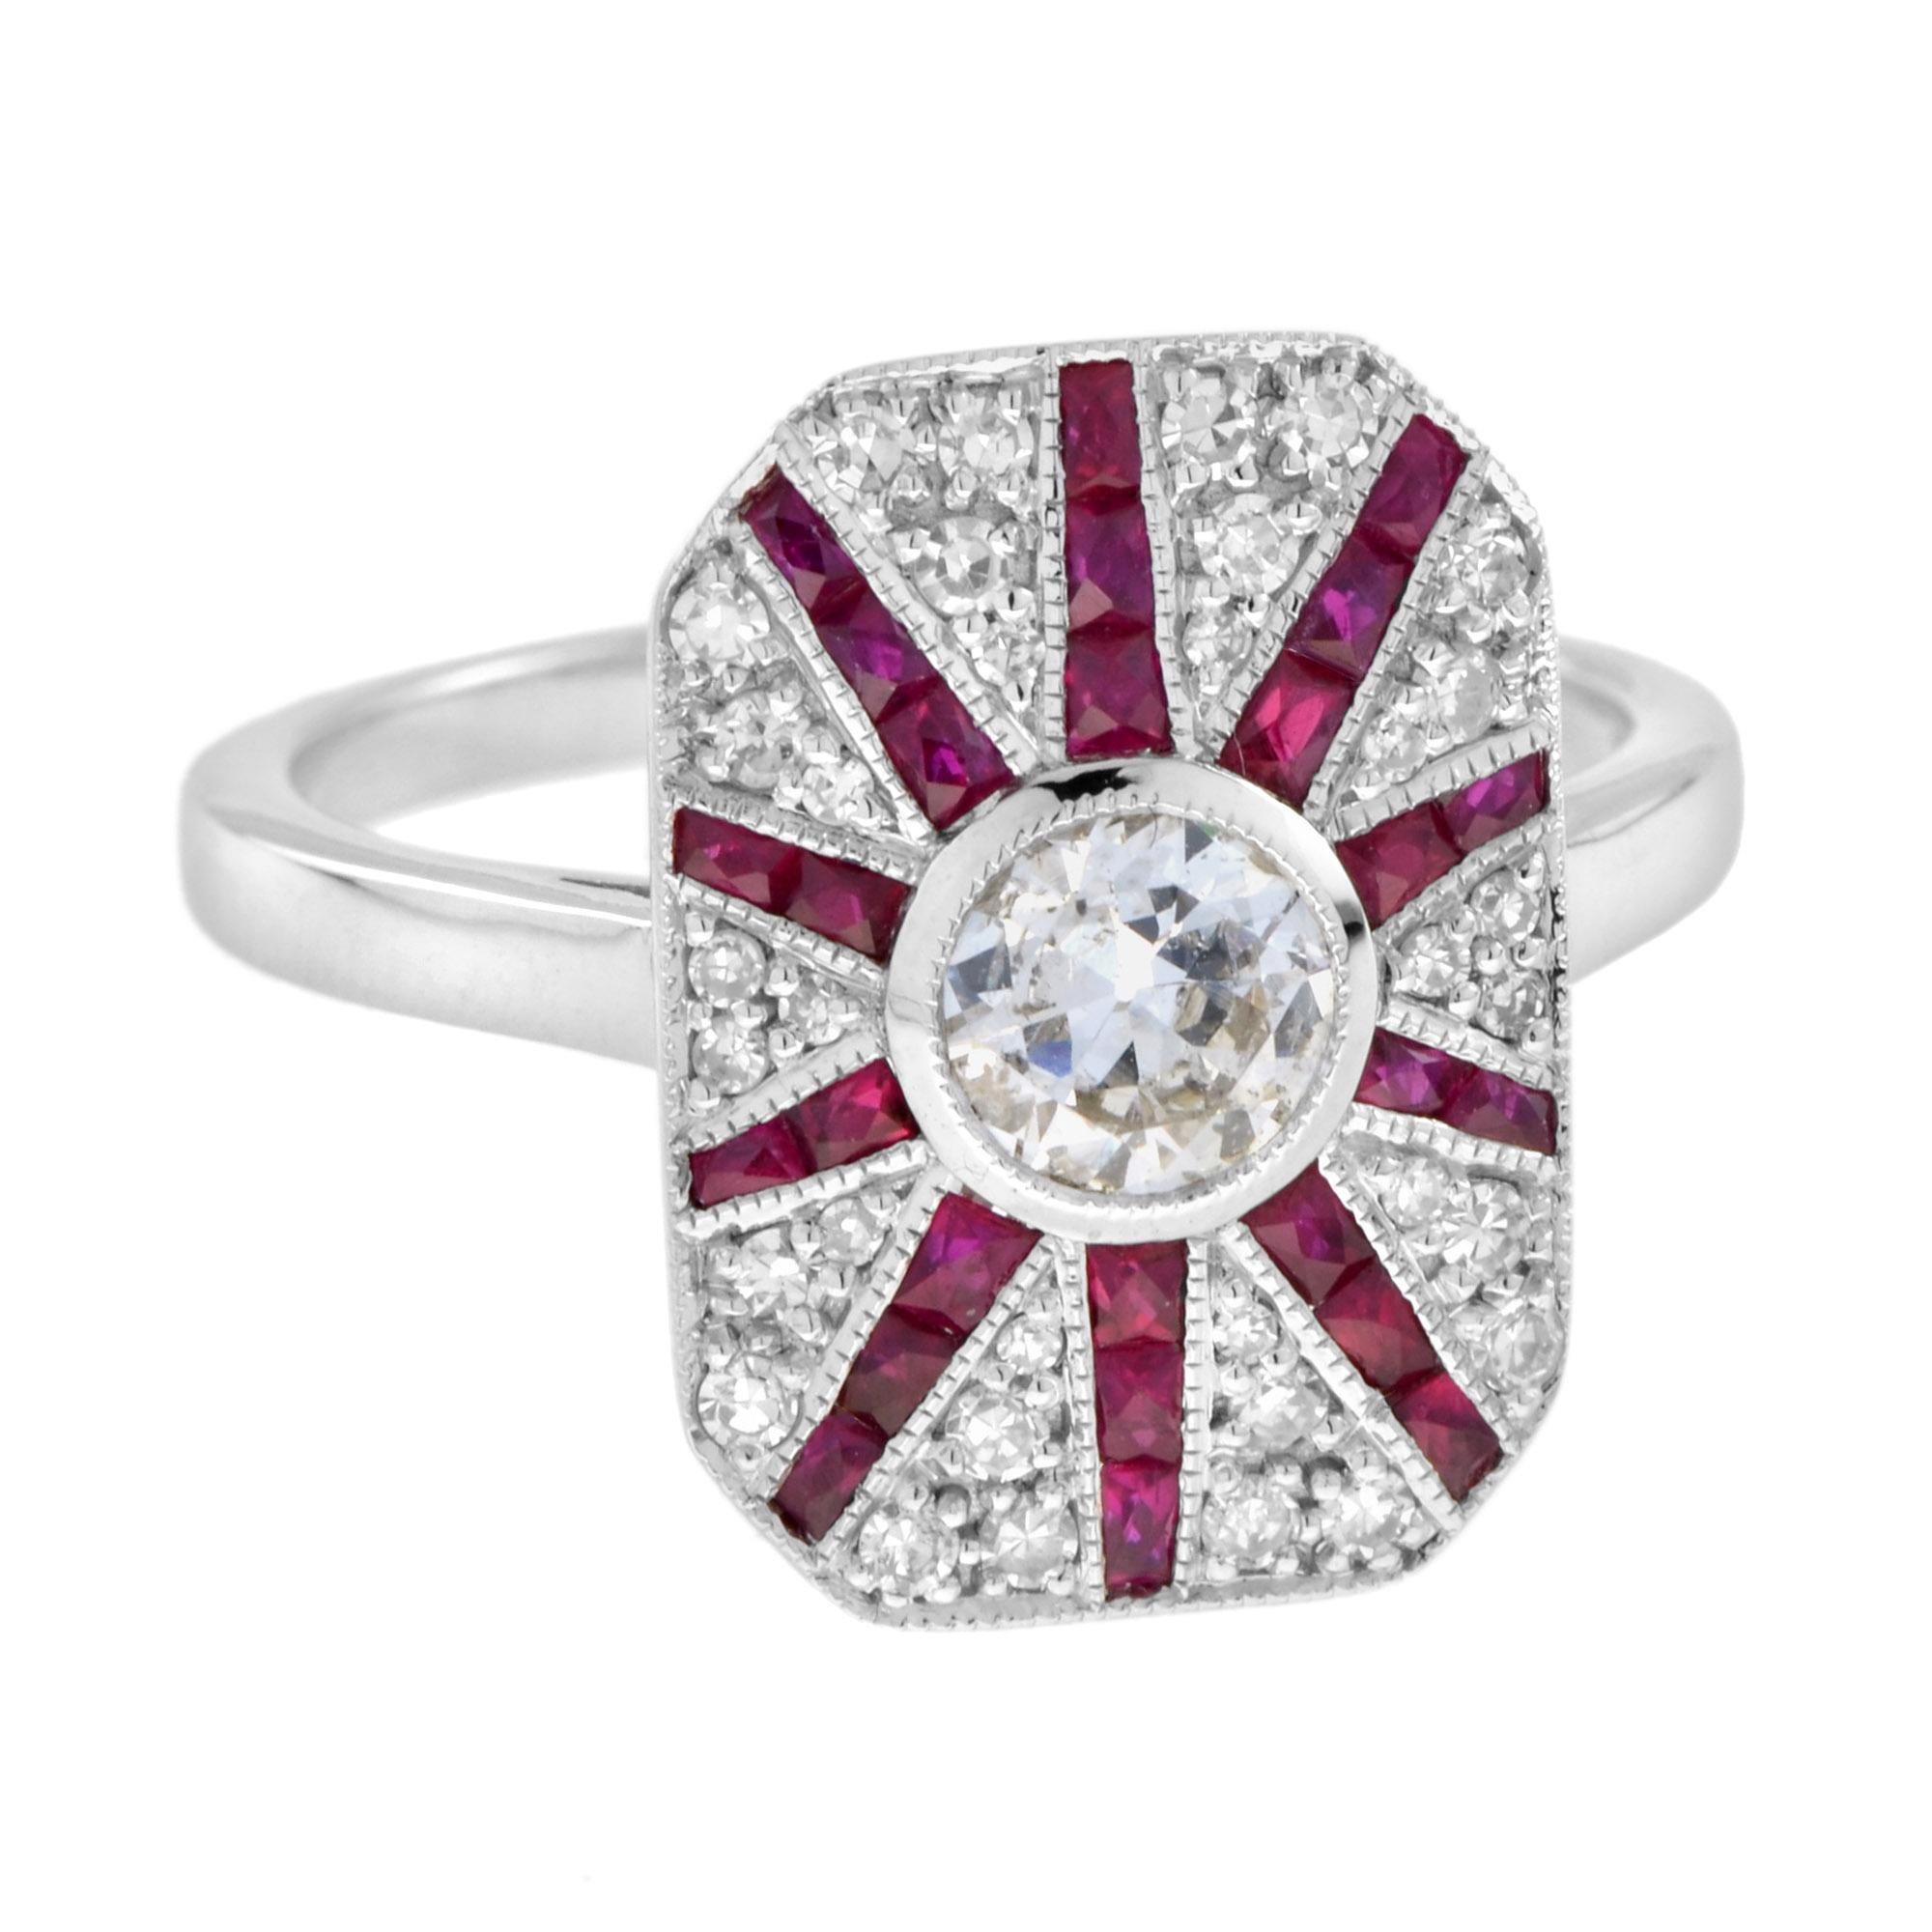 A stylish diamond and ruby ring crafted in 18k white gold. Old cut diamonds total an estimated 0.48 carats. French cut rubies total an estimated 0.75 carats. Art Deo in style, the ring highlight a candy stripe of rubies set into the octagonal mount,